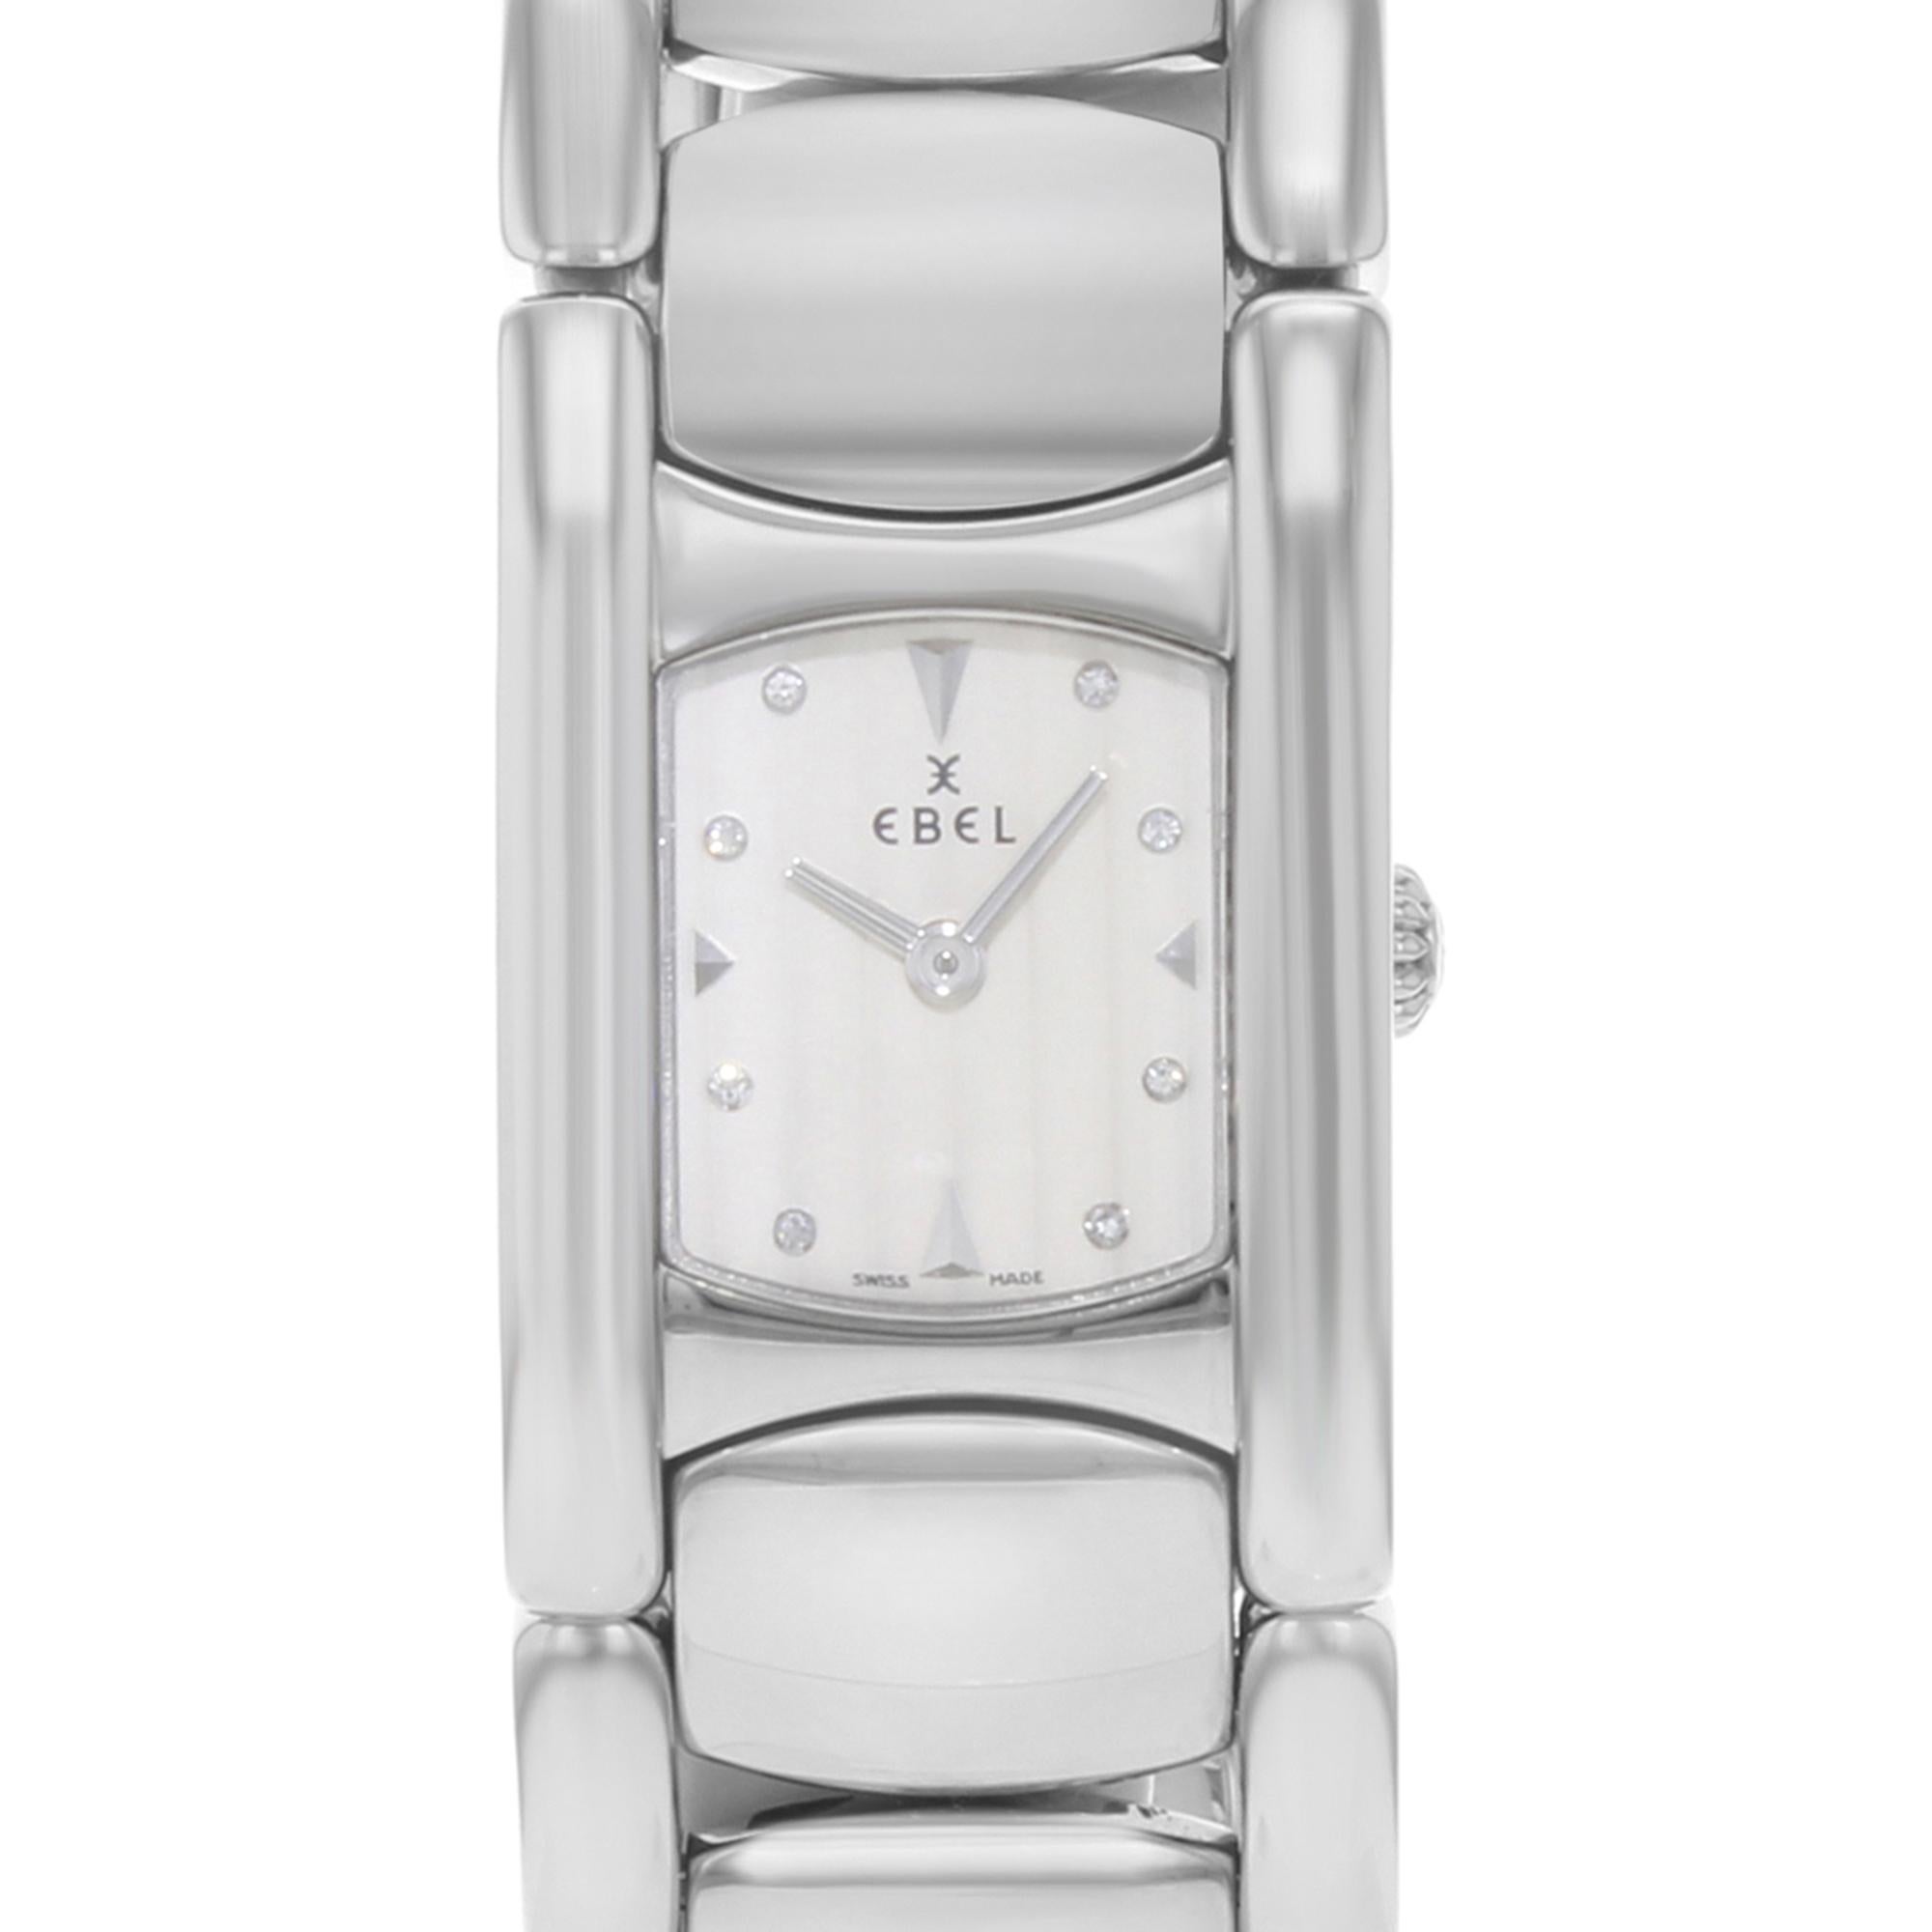 This display model Ebel Beluga 9057A21 is a beautiful Womens timepiece that is powered by a quartz movement which is cased in a stainless steel case. It has a rectangle shape face, diamonds dial and has hand diamonds style markers. It is completed